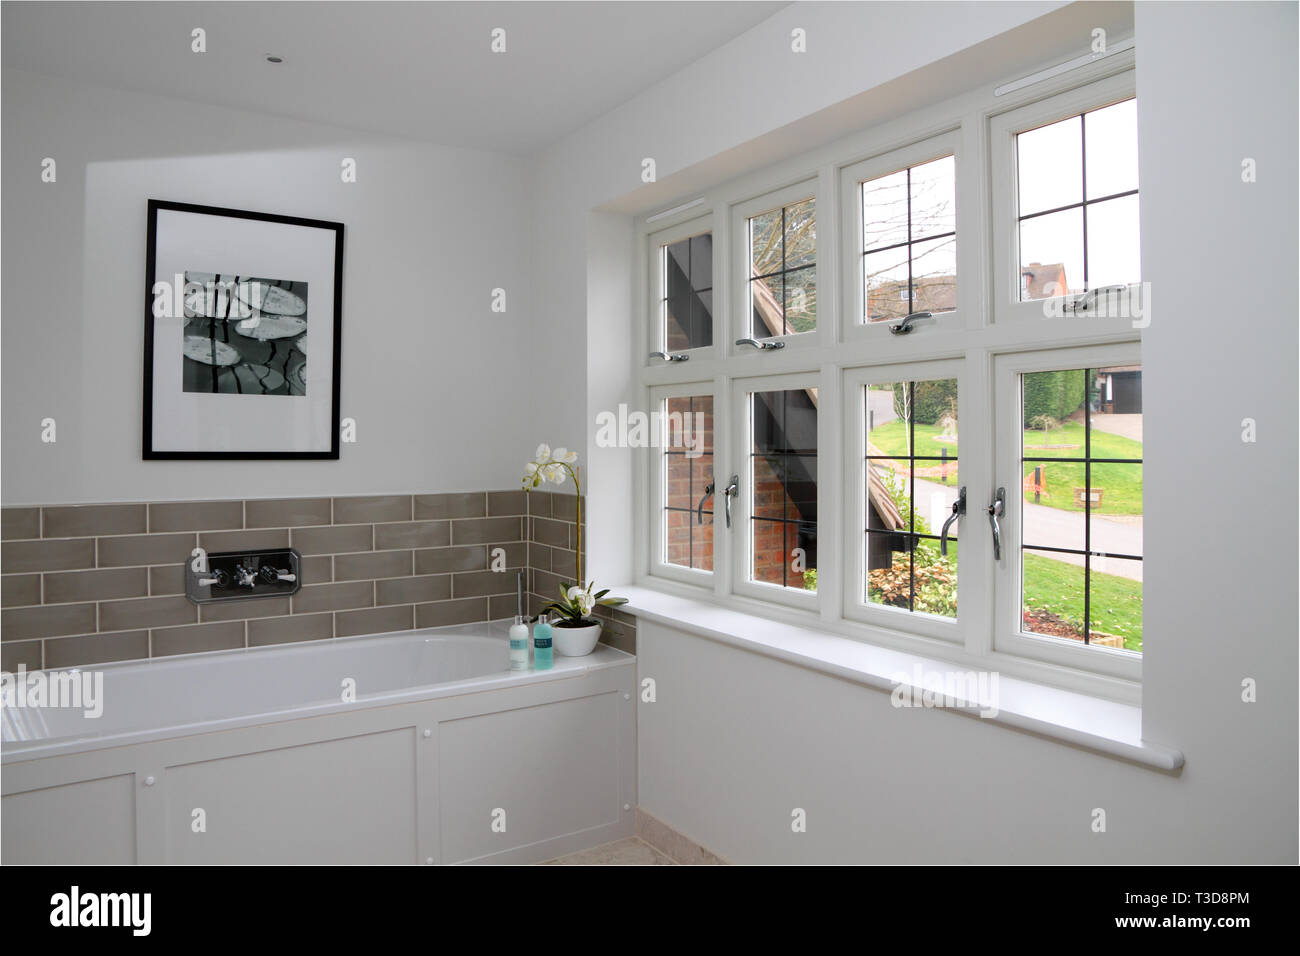 New bathroom with six panel opening wooden windows Stock Photo